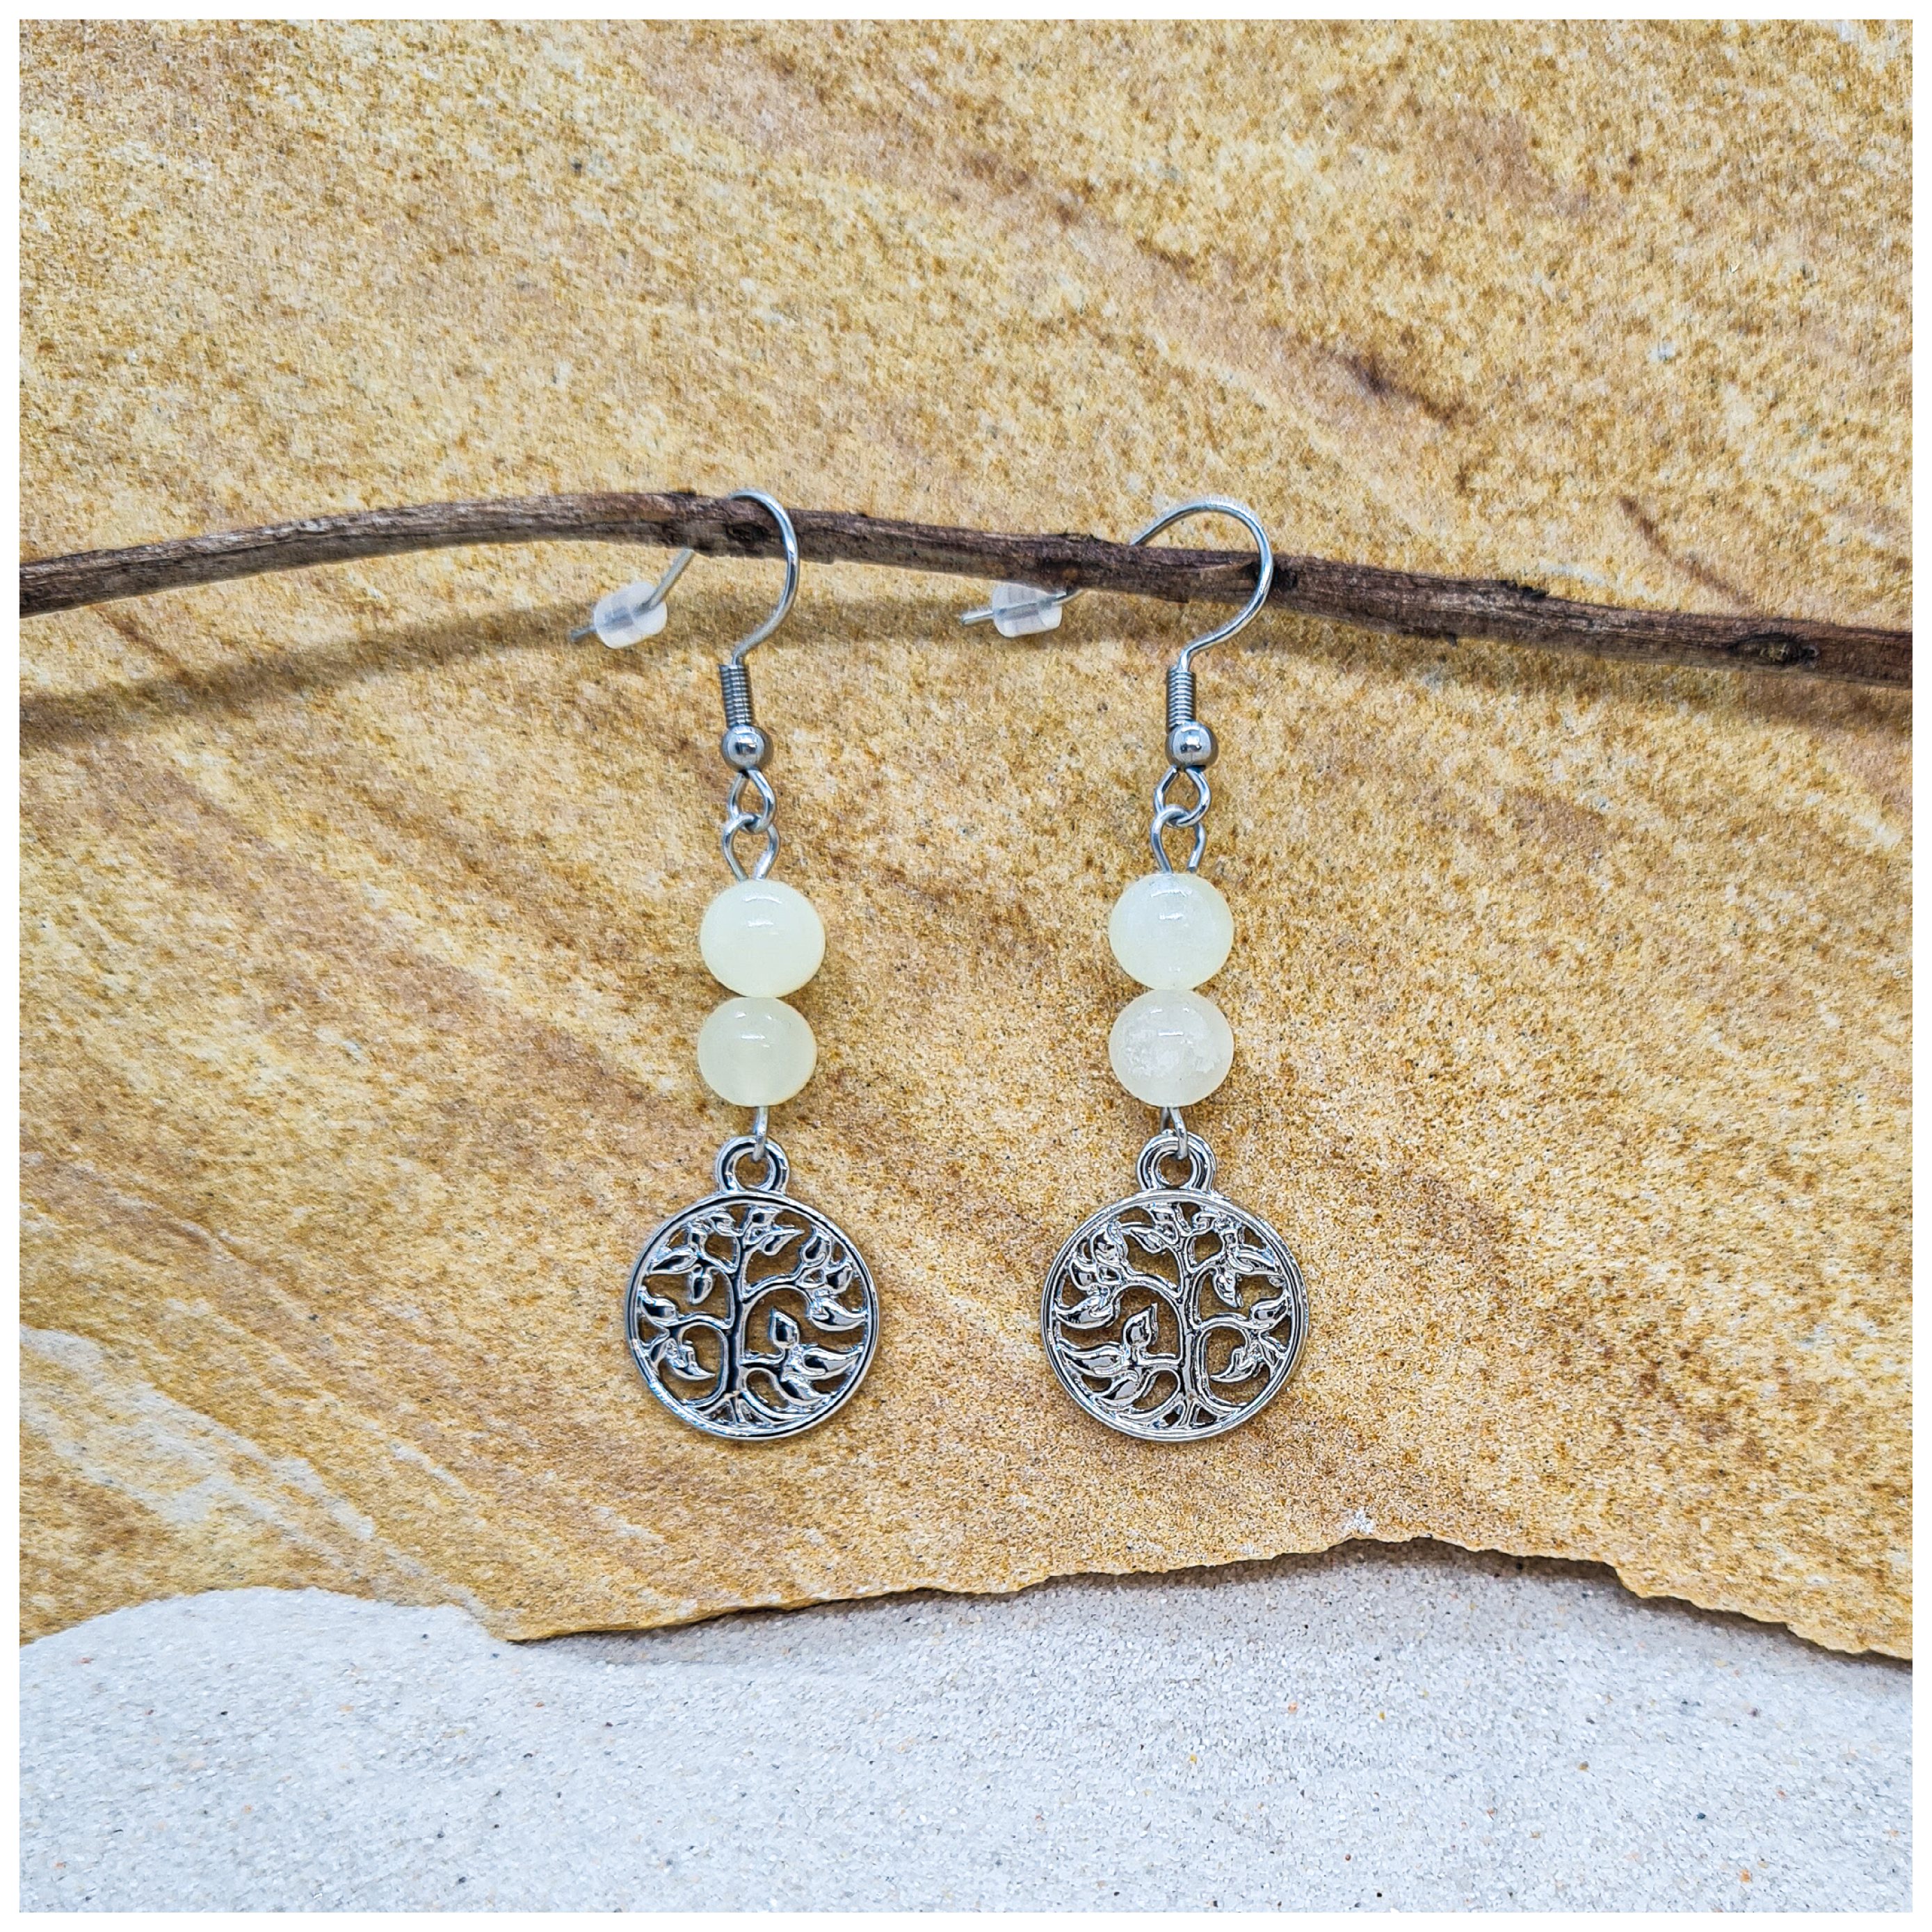 New Jade 6mm crystal bead drop earring with silver tree of life charm